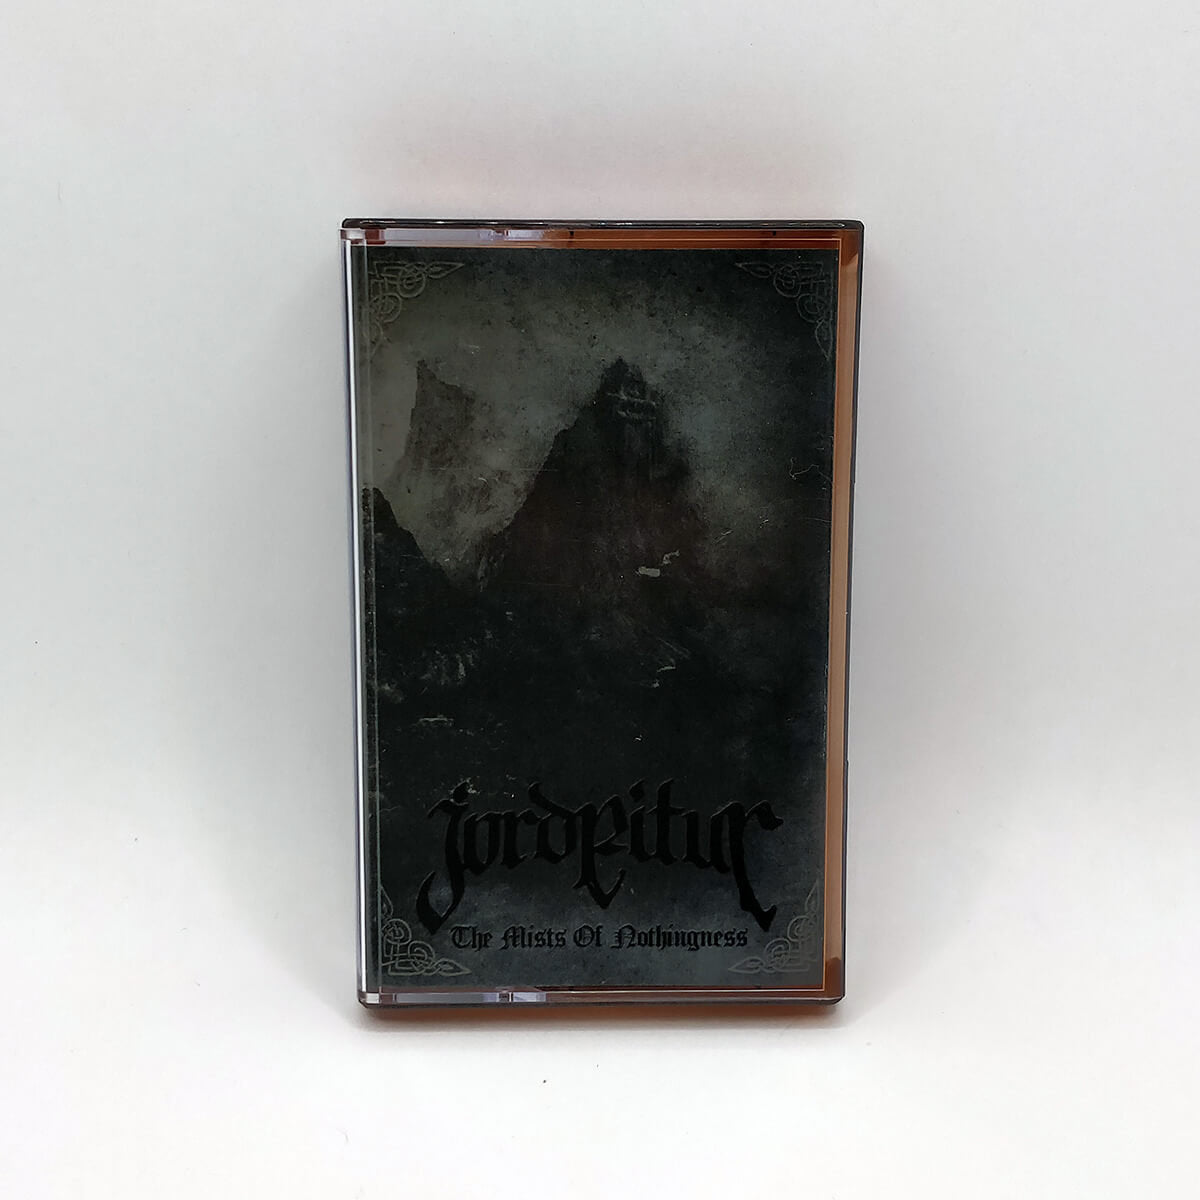 JORD EITUR "The Mists of Nothingness" Cassette Tape